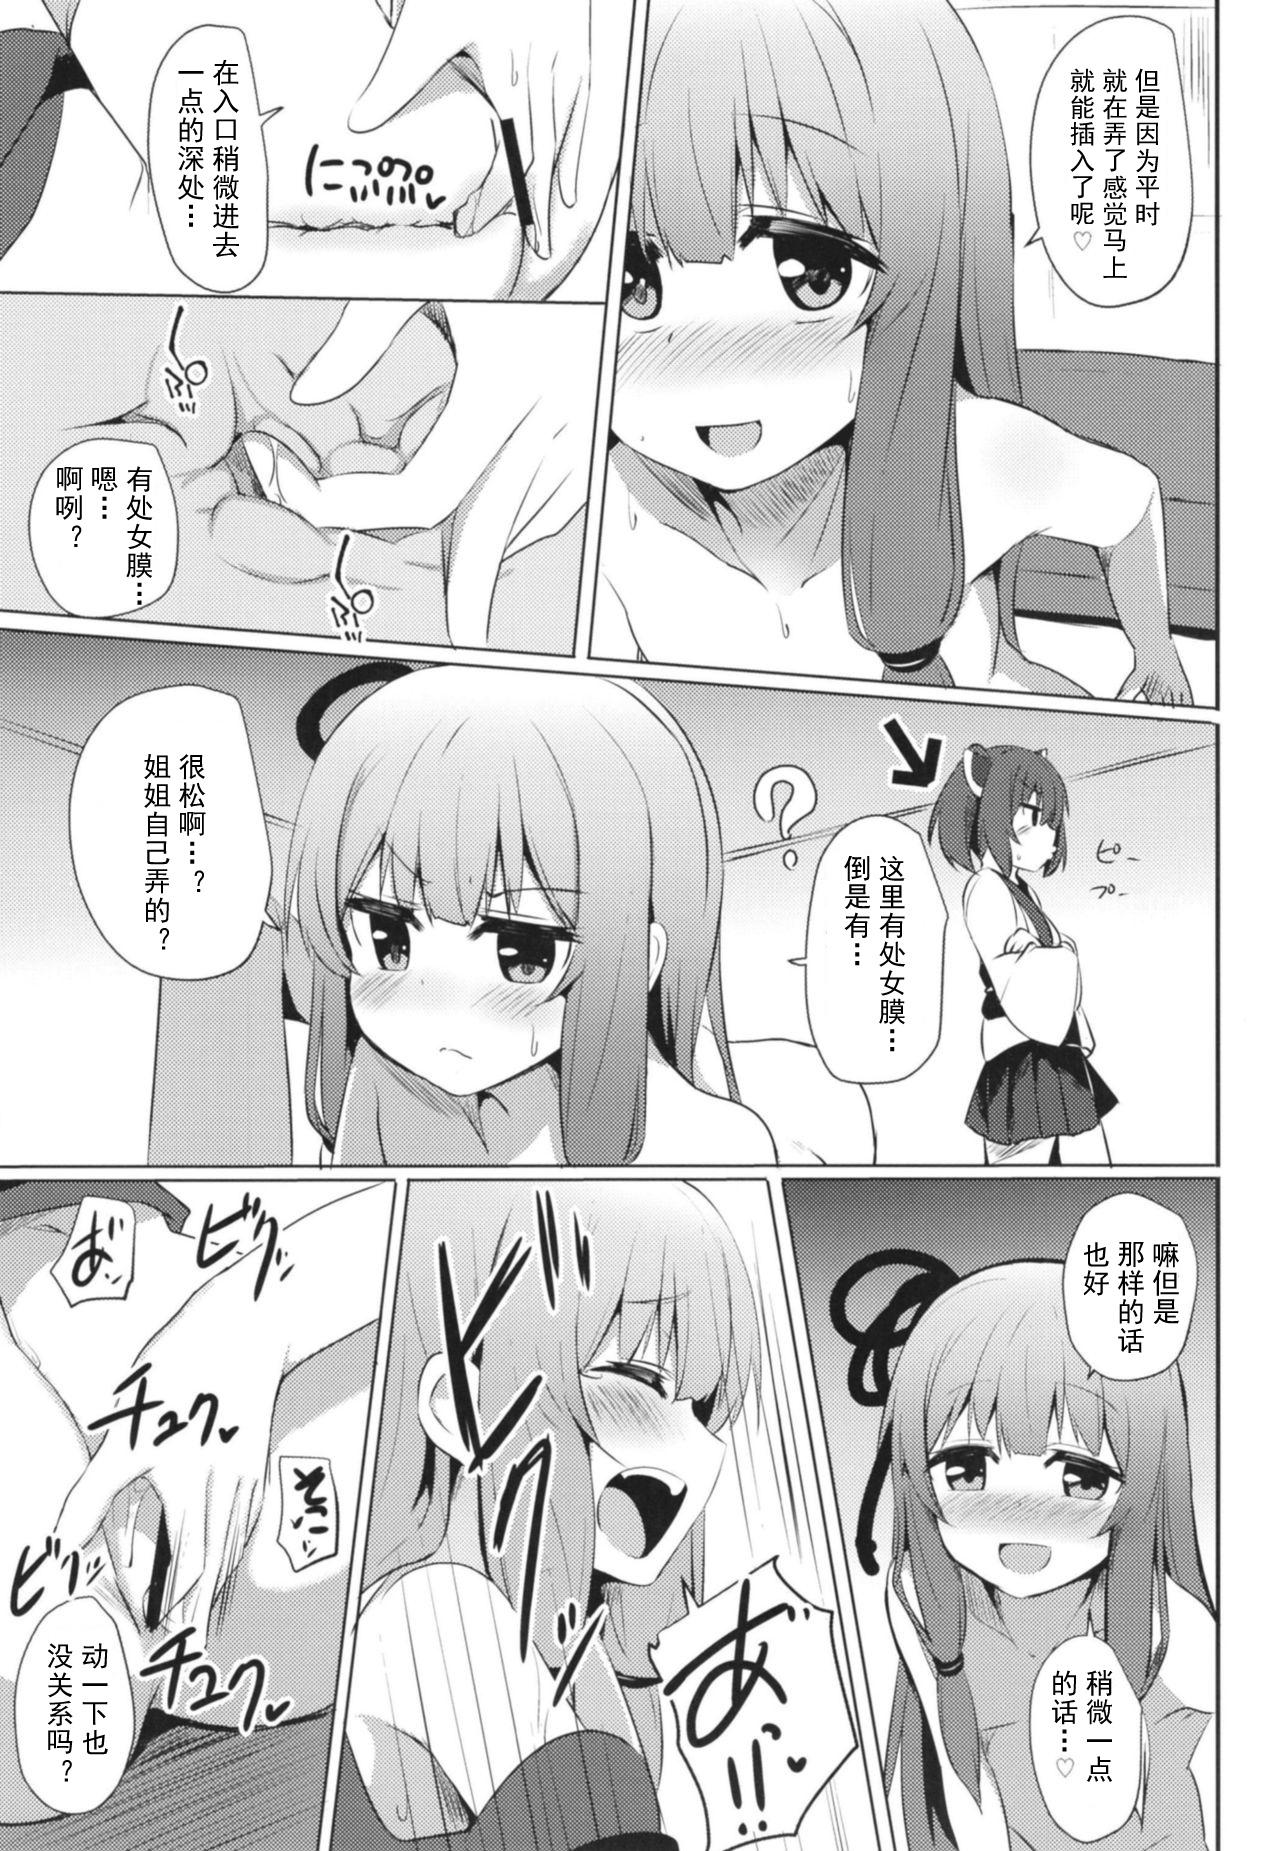 Muscles [Milk Pudding (Jamcy)] Akane-chan Challenge! 4-kaime (VOICEROID) [Chinese] [古早个人汉化] [Digital] - Voiceroid Fist - Page 7